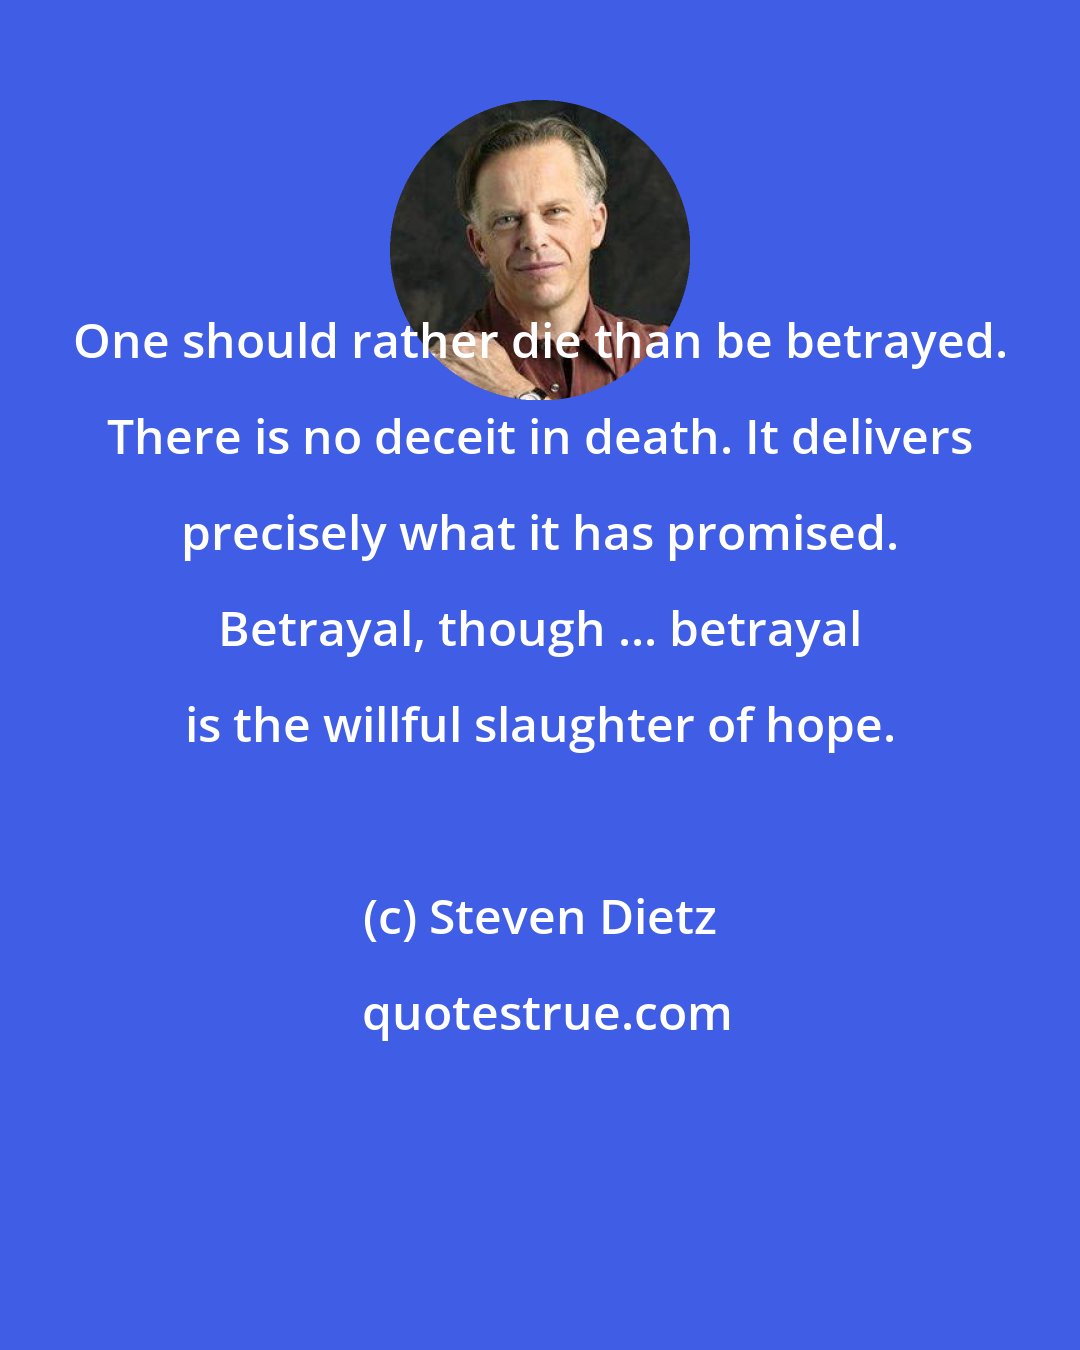 Steven Dietz: One should rather die than be betrayed. There is no deceit in death. It delivers precisely what it has promised. Betrayal, though ... betrayal is the willful slaughter of hope.